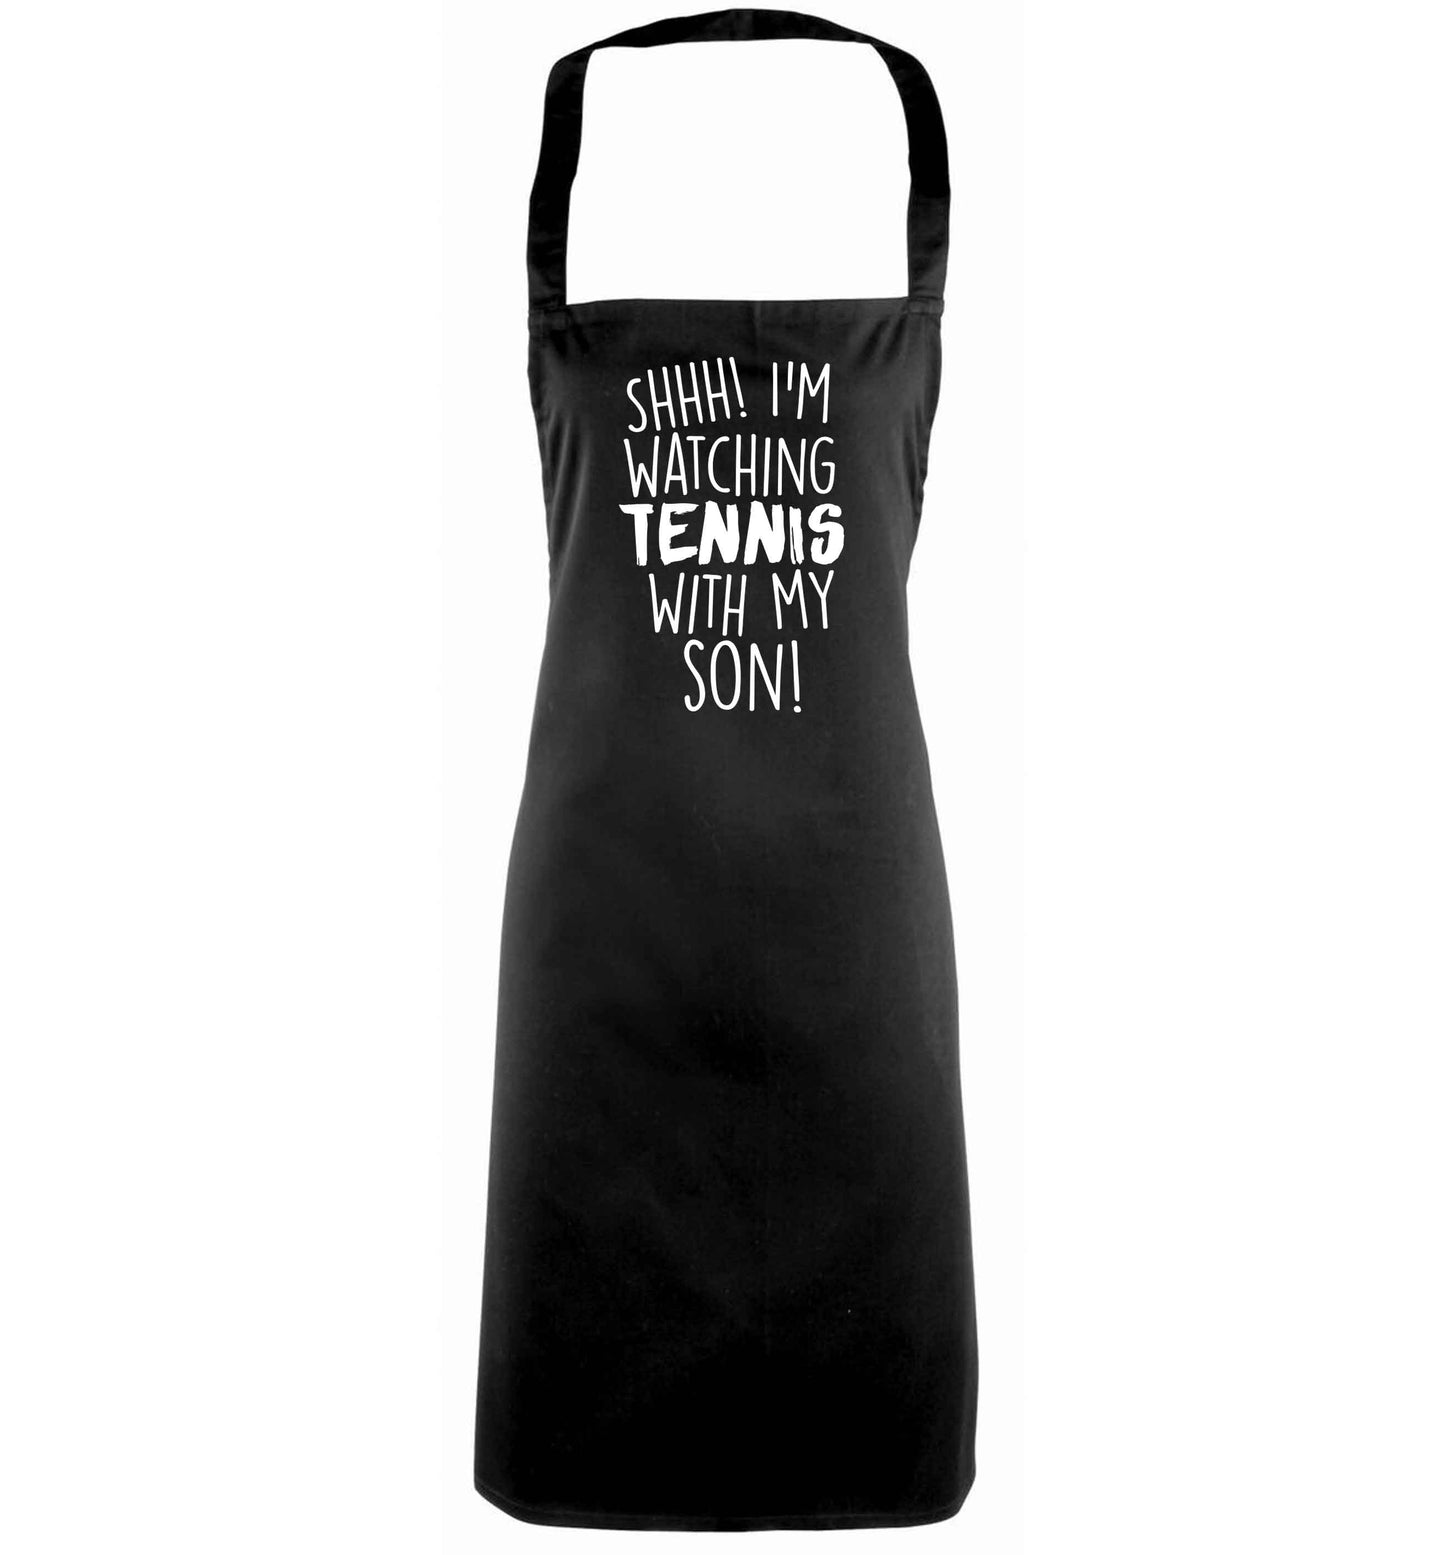 Shh! I'm watching tennis with my son! black apron